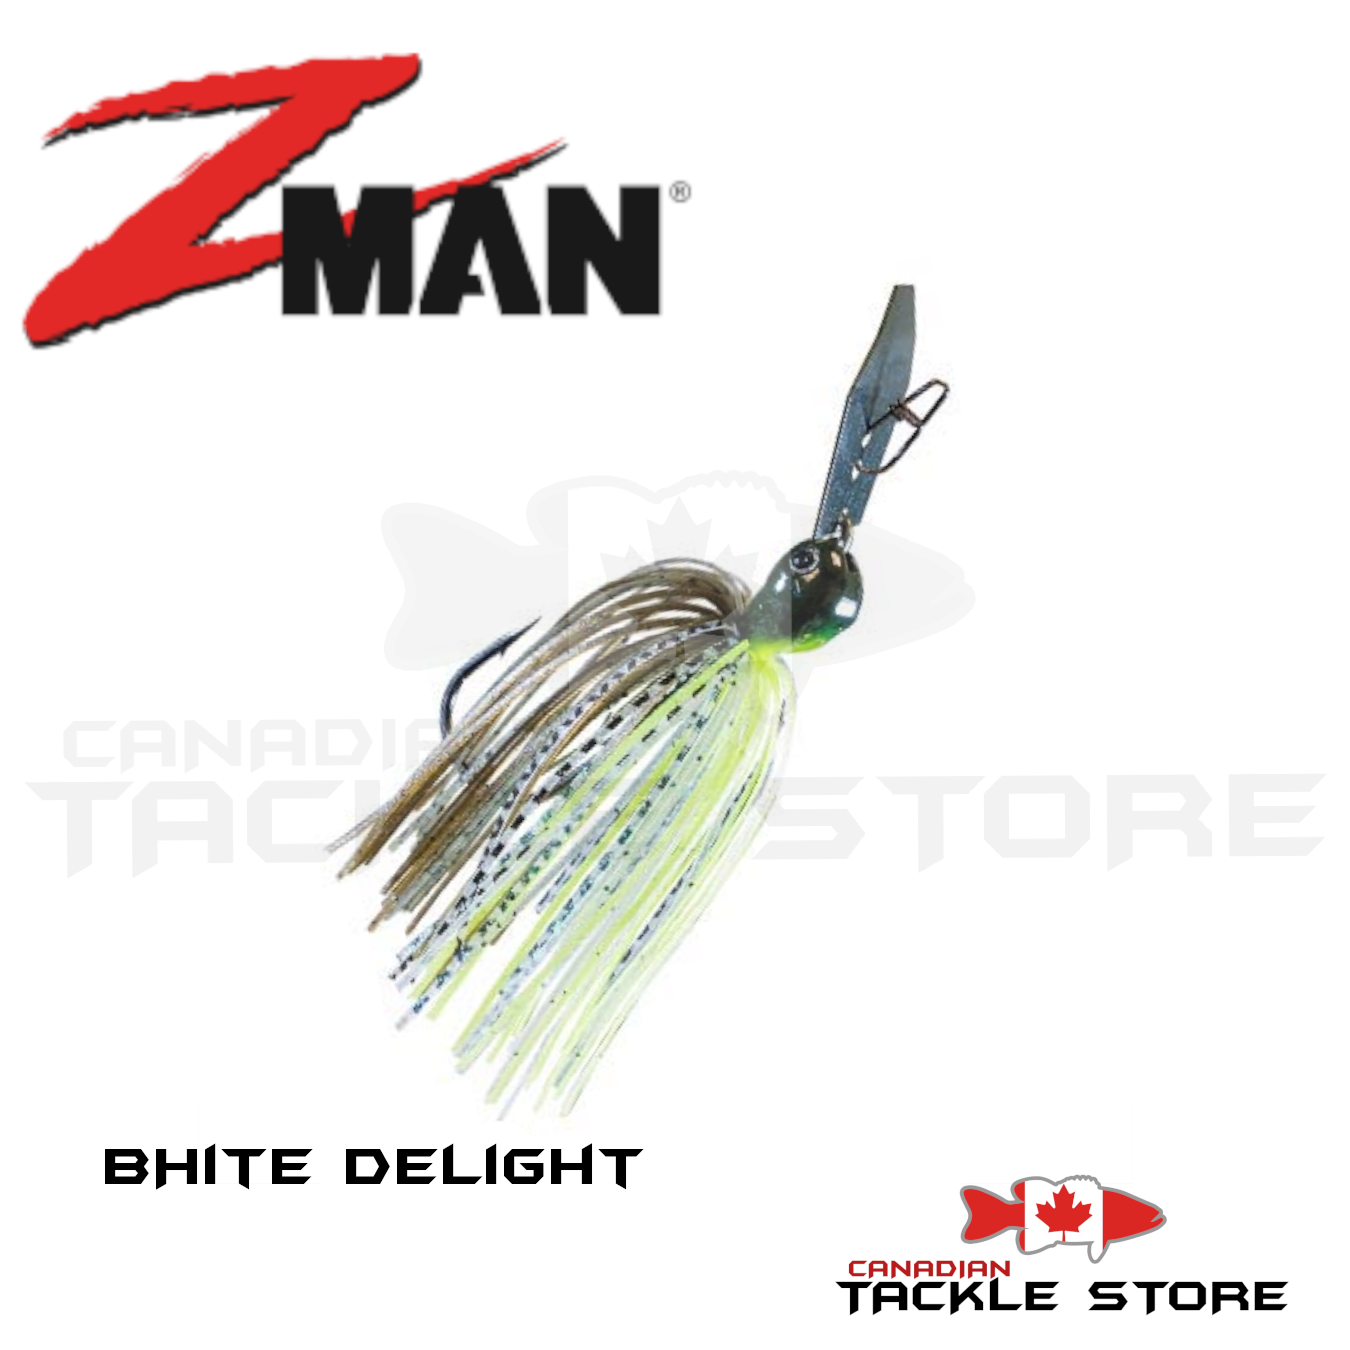 Z-Man Chatterbaits – Canadian Tackle Store